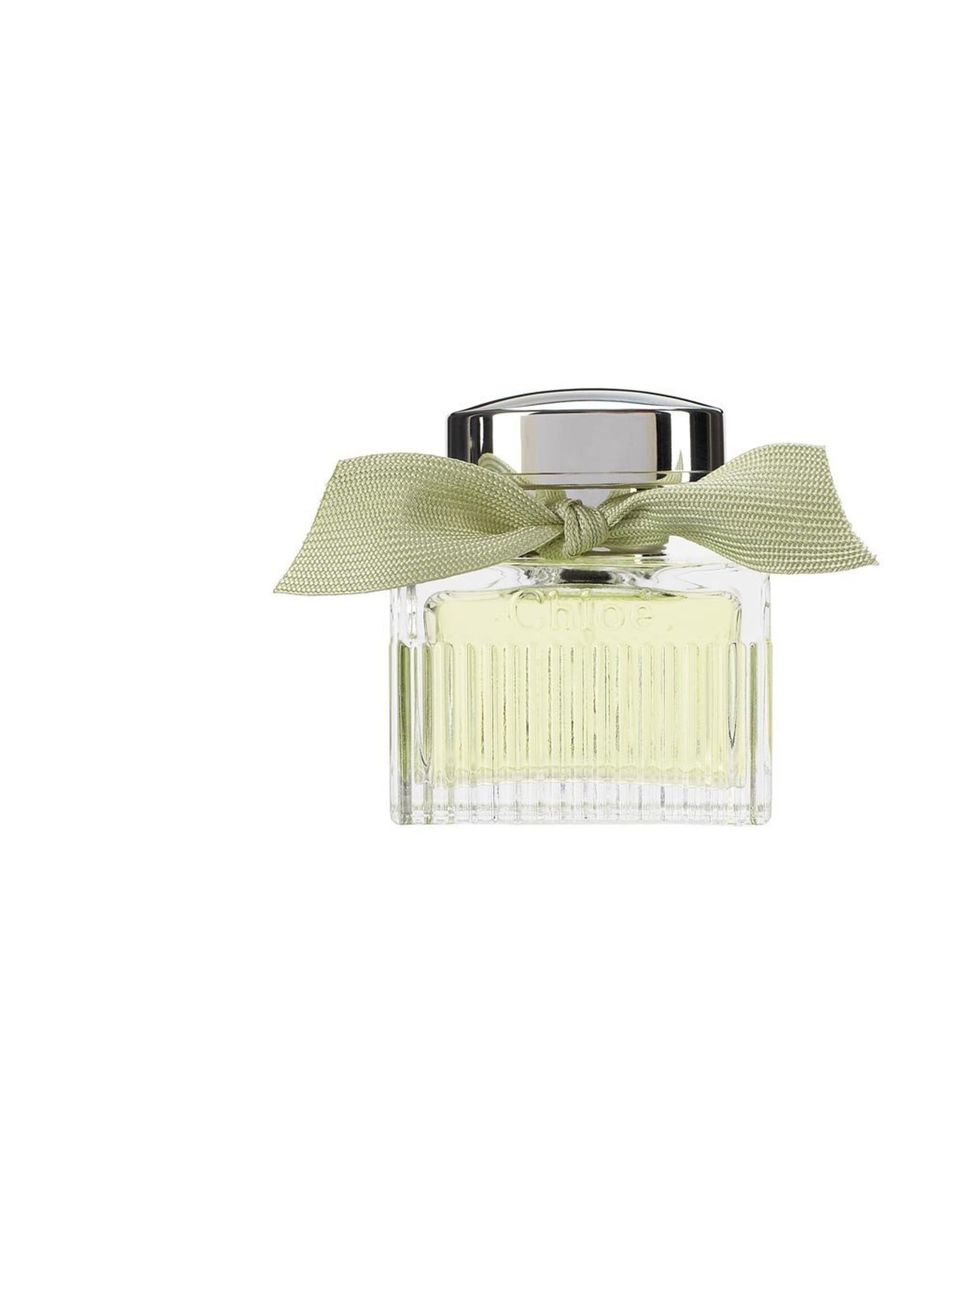 <p>Beautifully tailored and grown-up. A crisp, zesty scent with plenty of green notes.</p><p><em>Chloé LEau de Chloé EDT, £46 for 50ml at <a href="http://www.escentual.com/chloe/leaudechloe004/?utm_source=froogle&amp;utm_medium=shopping">Escentual</a></e